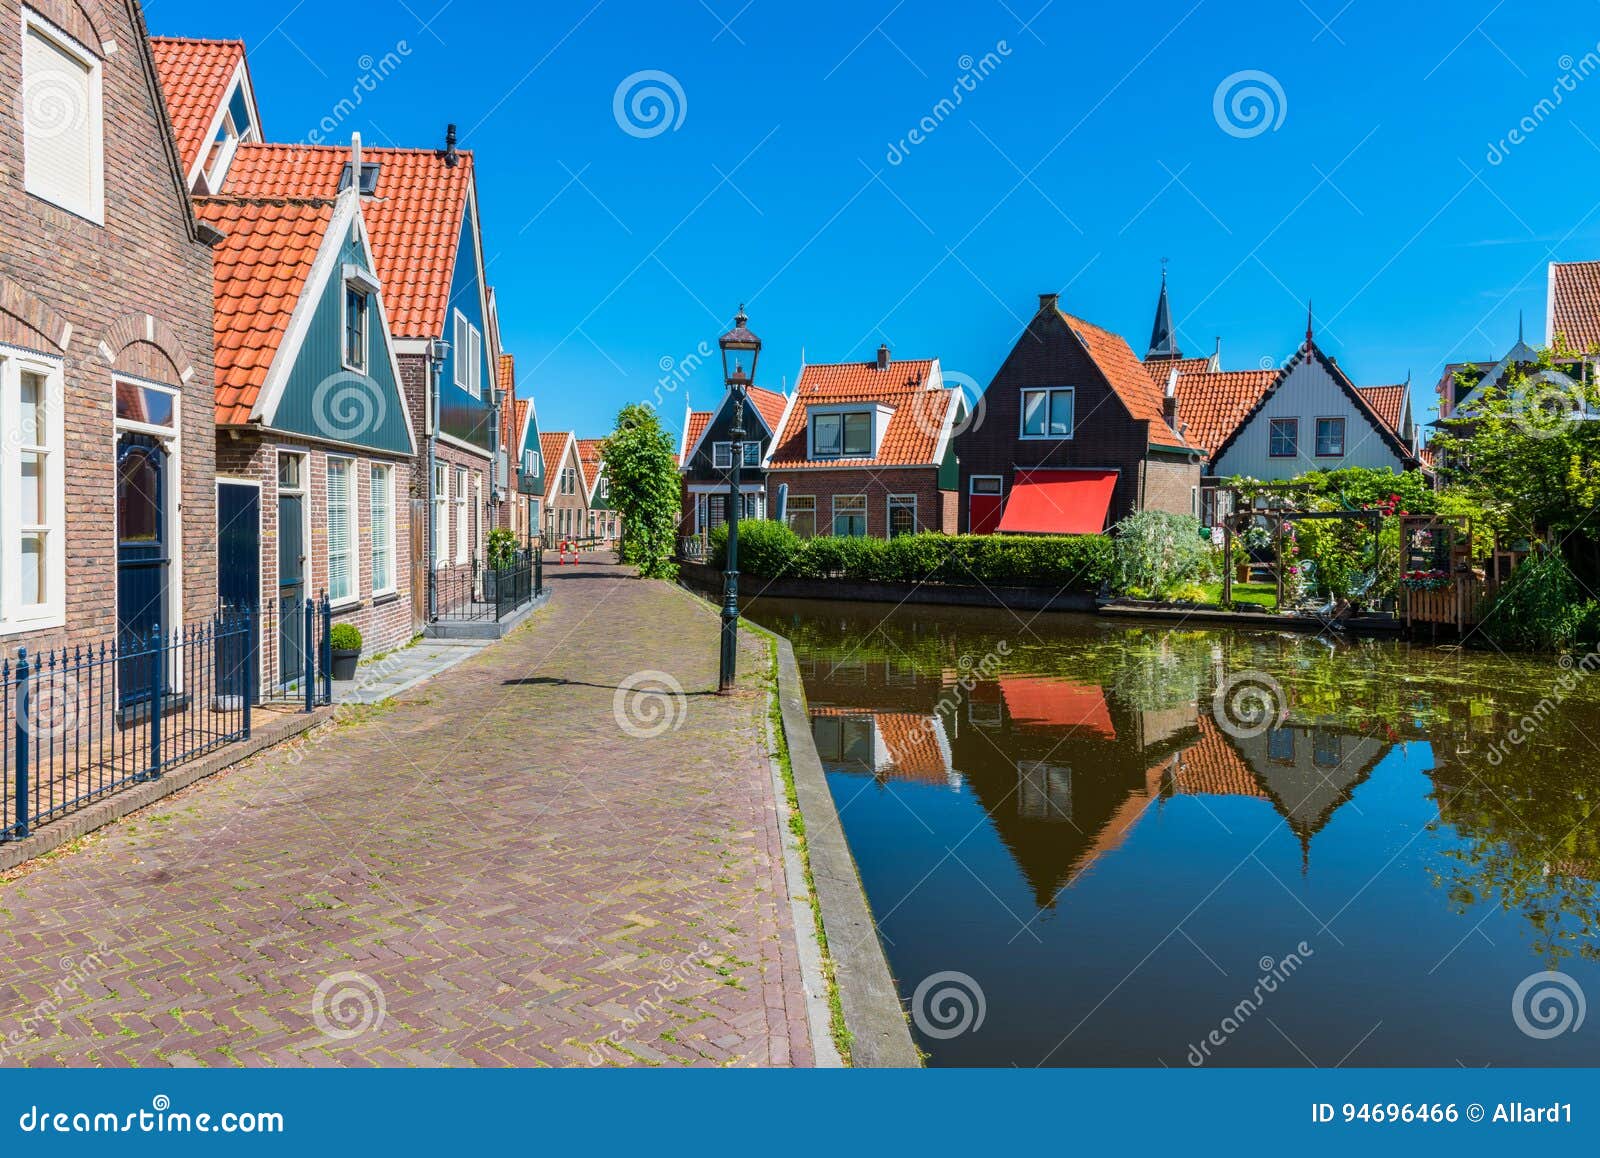 street and canal in volendam netherlands